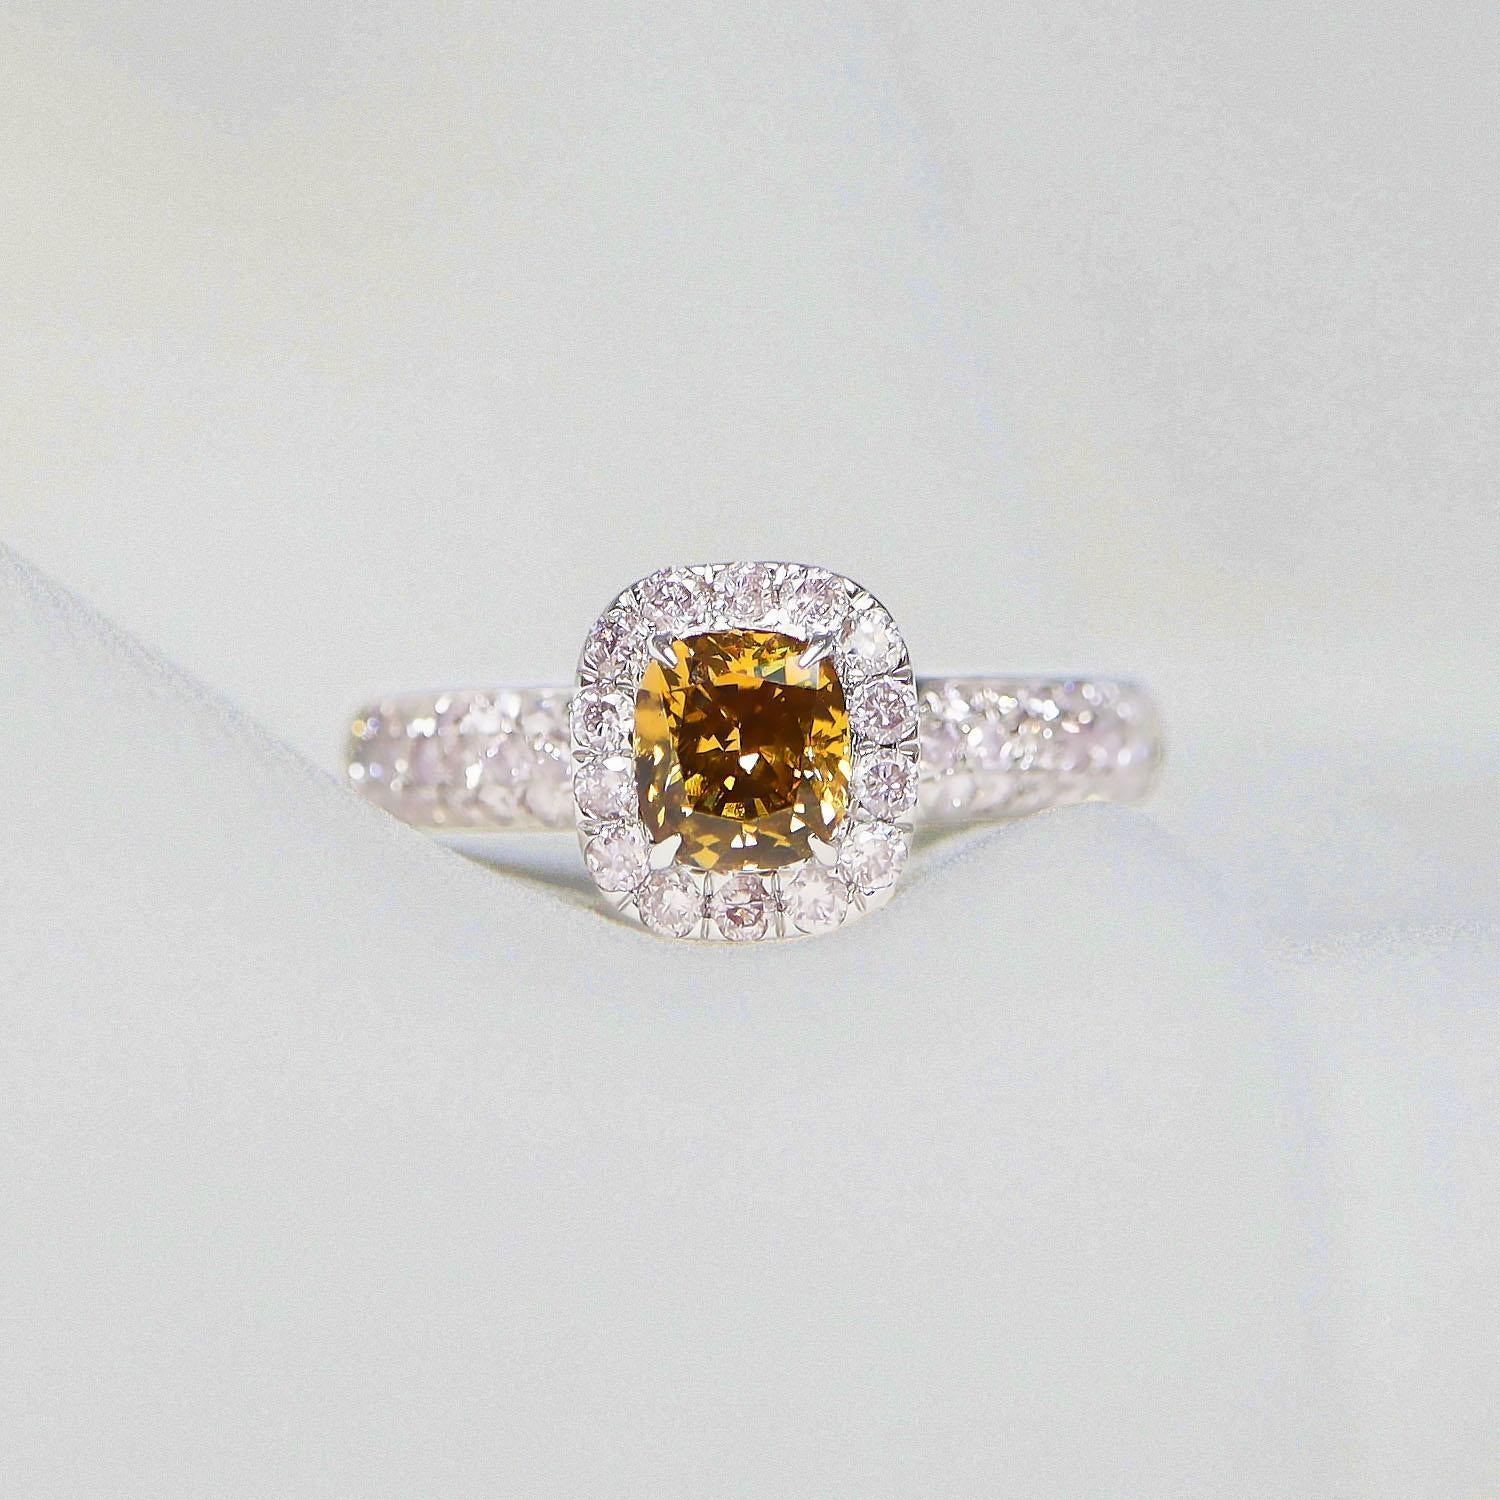 *IGI 14K 0.76 Ct Yellow&Pink Diamonds Antique Art Deco Style Engagement Ring*

Natural fancy intense brownish-yellow Diamond weighing 0.76 ct set on the 14K white gold pave' design band with natural round brilliant cut pink diamonds weighing 0.57